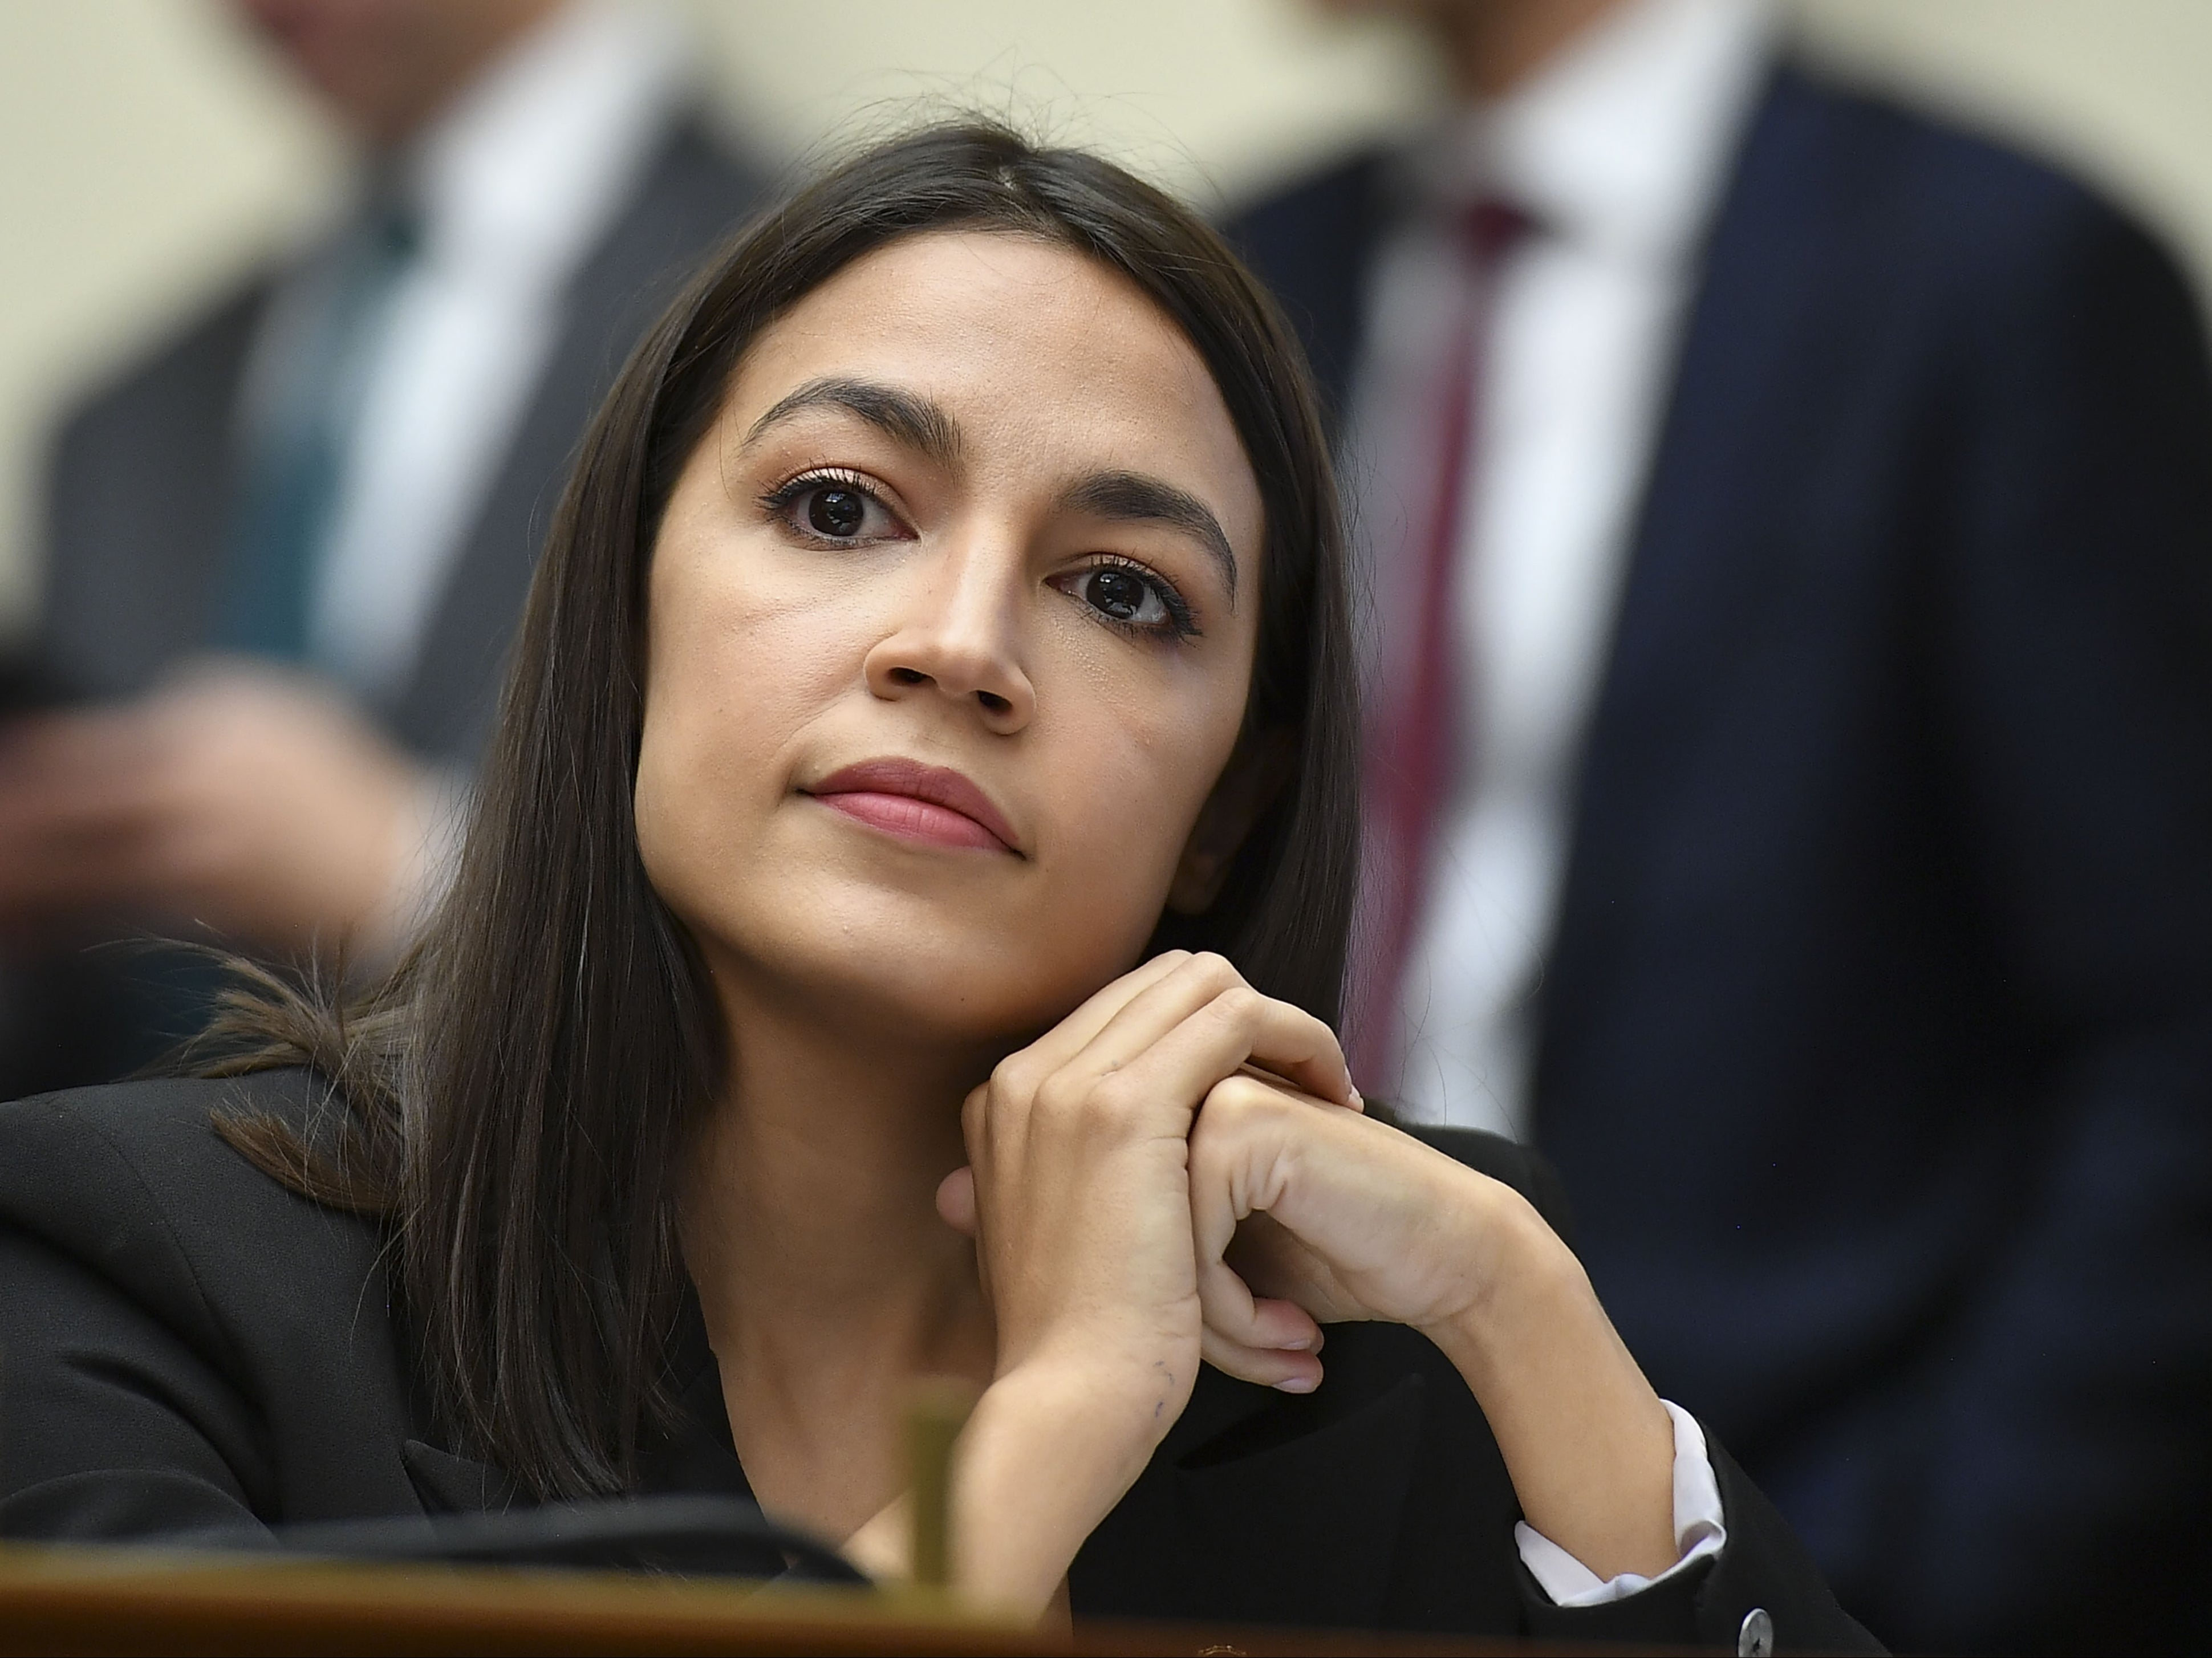 Rep. Alexandria Ocasio-Cortez implied that her Republican colleague, Marjorie Taylor Greene, was trying to cut her workday short.